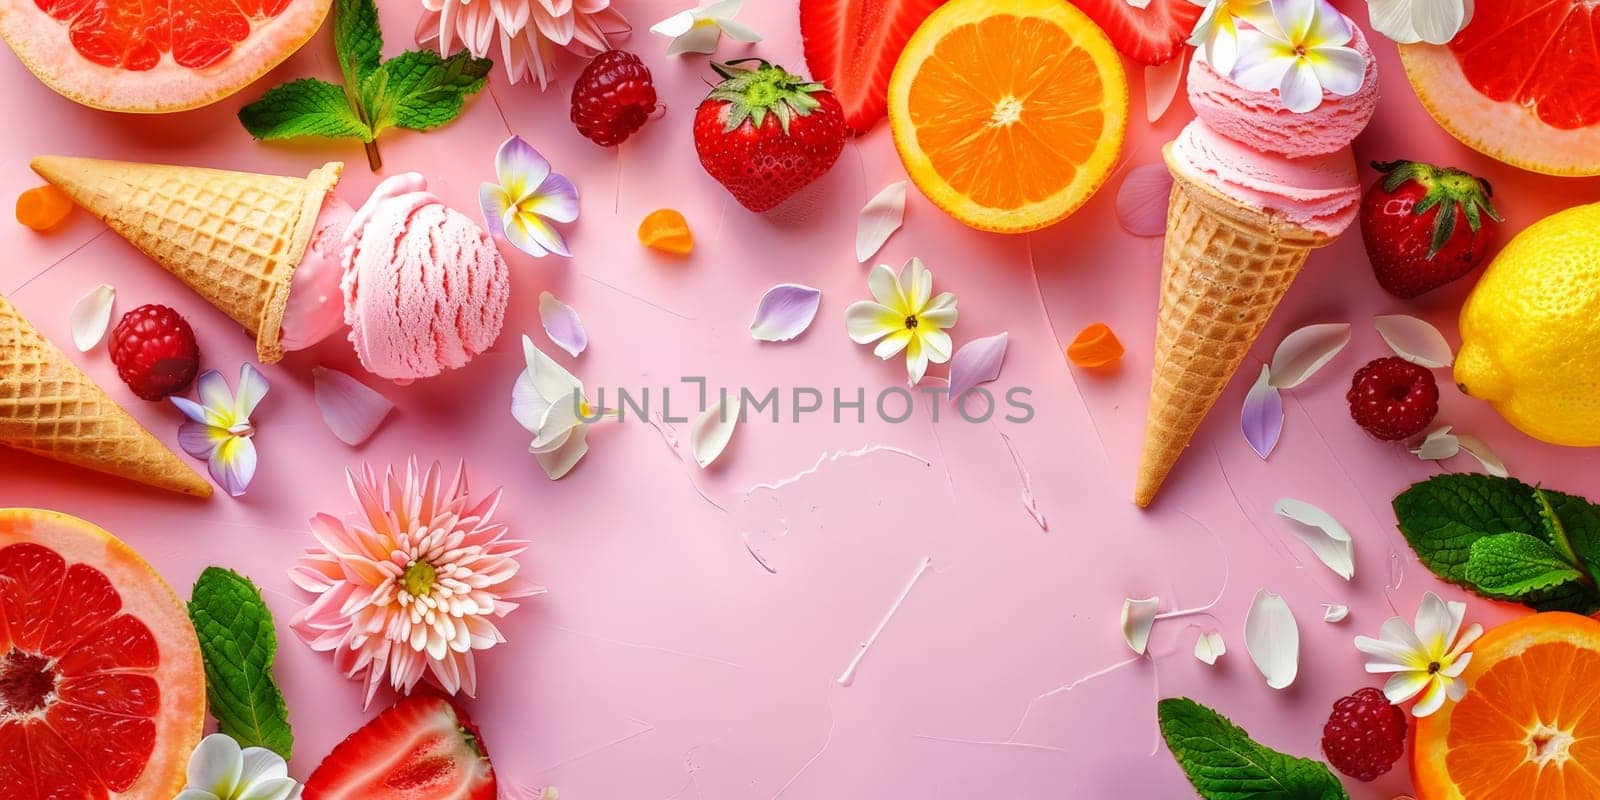 A colorful display of fruit and ice cream on a pink background by nateemee